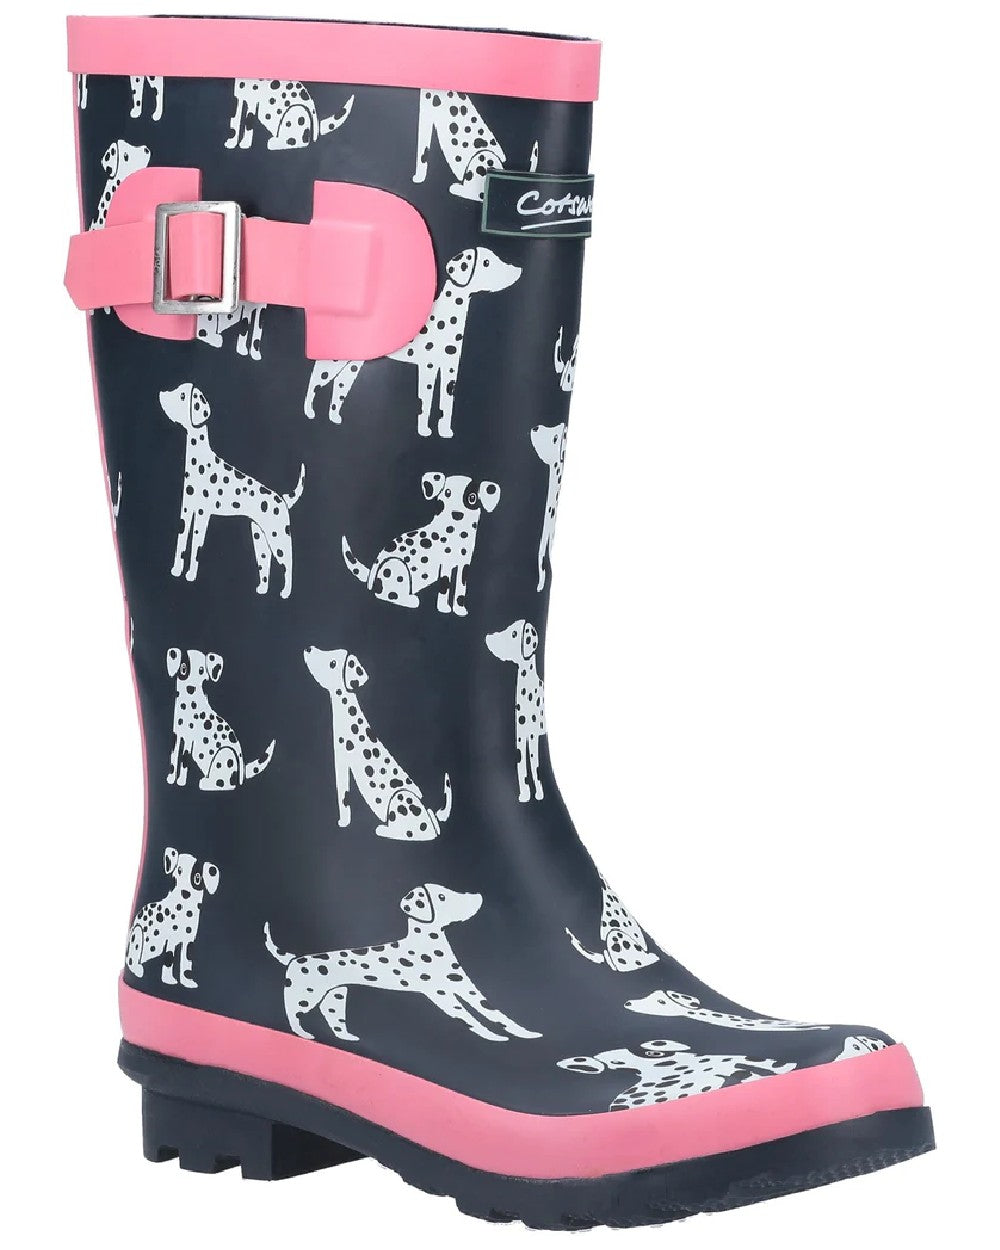 Cotswold Childrens Spot Wellington Boots in Navy Dalmatian Print